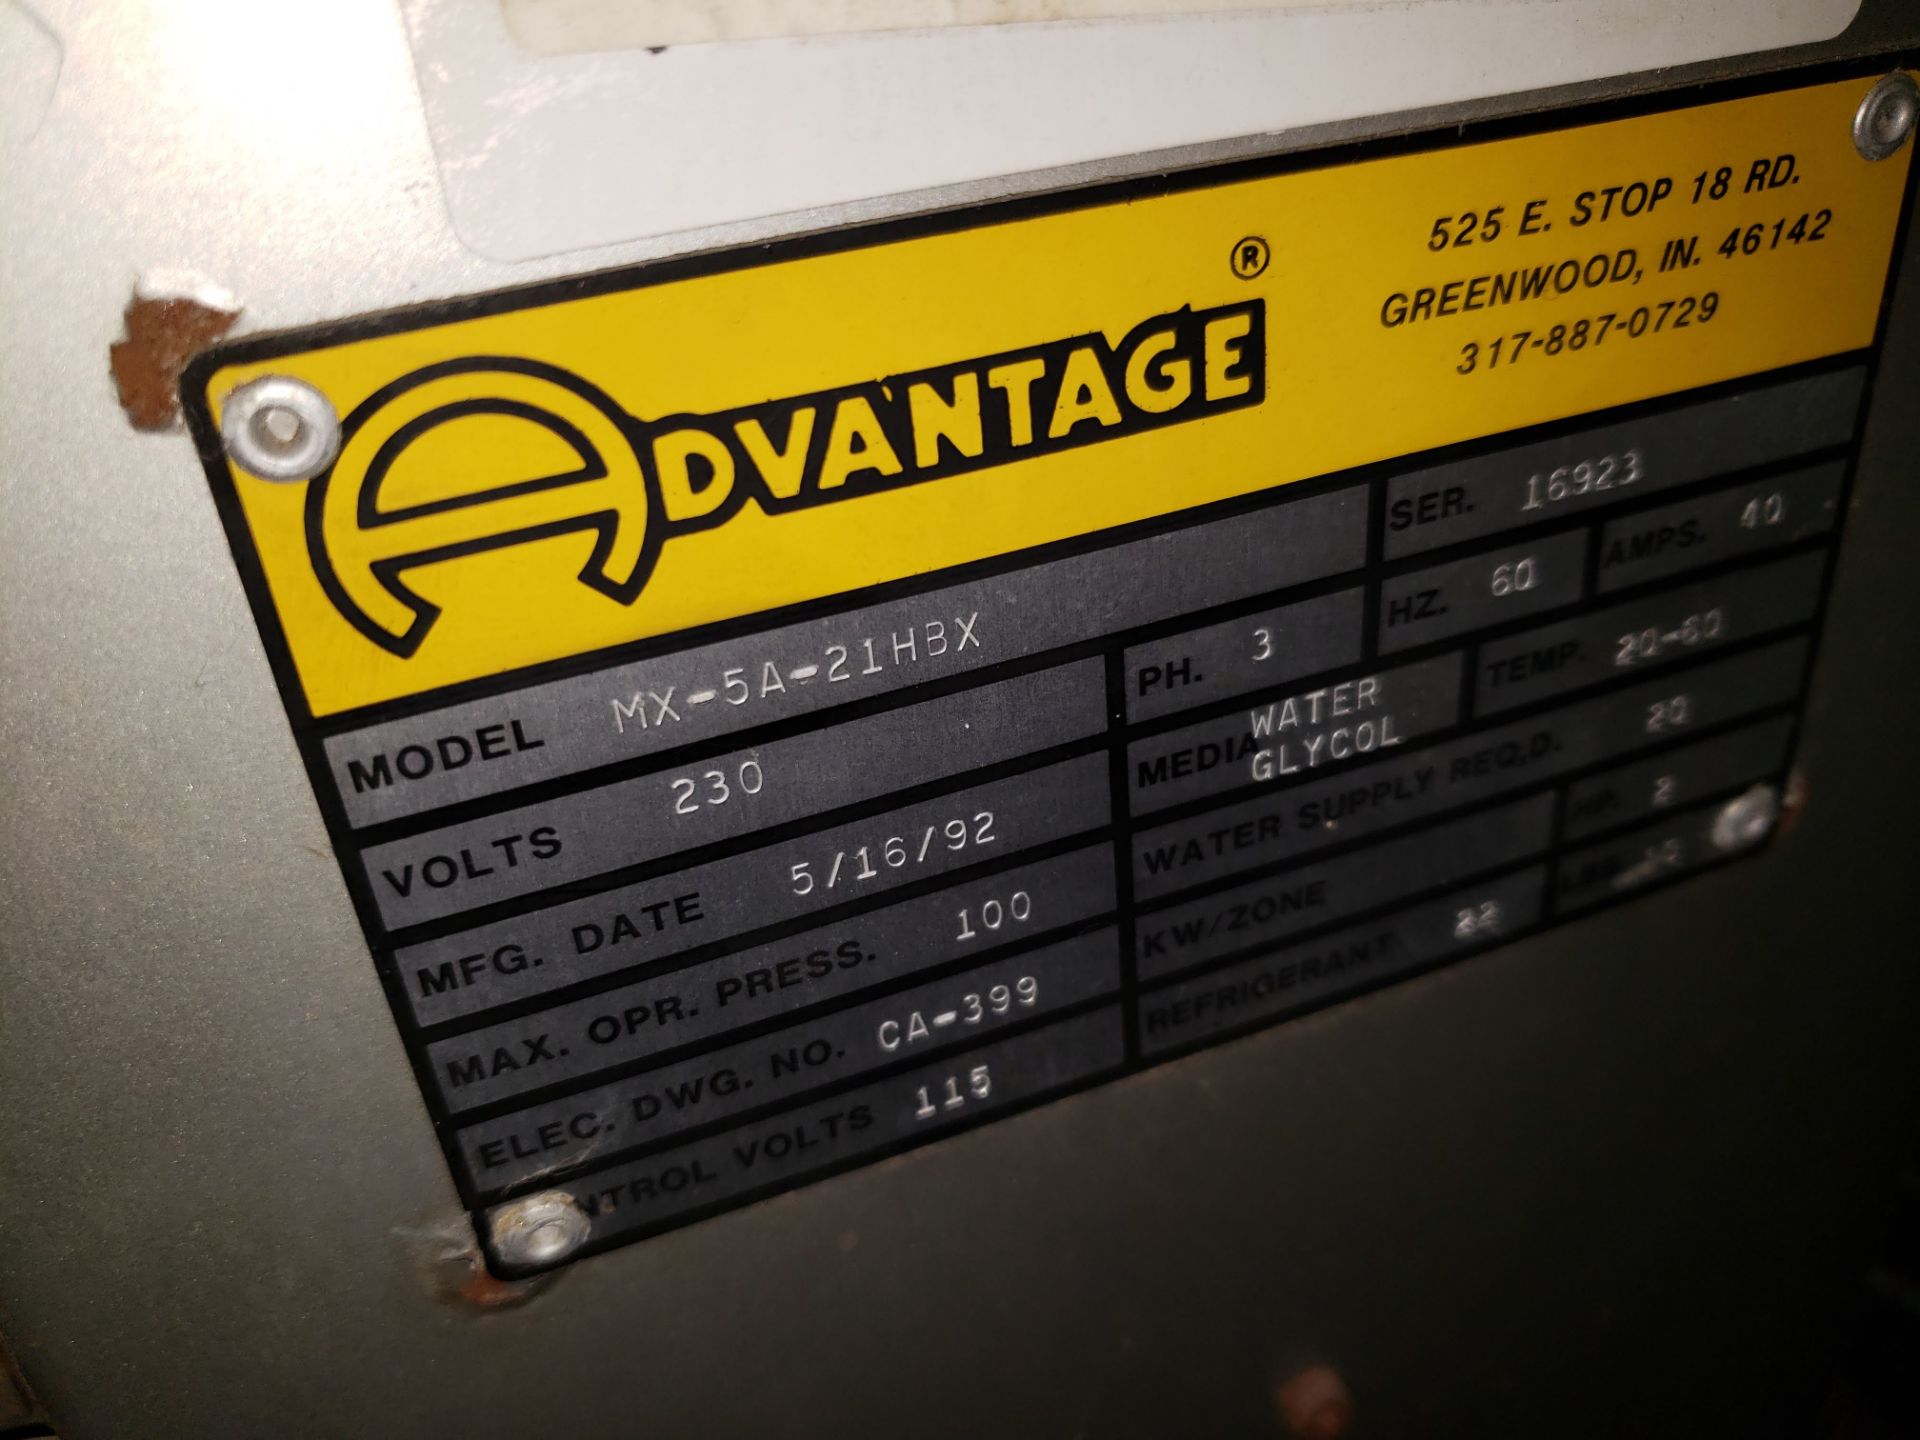 ADVANTAGE CHILLER MODEL-MX-5A-21HBX S#16923 WATER/GLYCOL 2HP (LOCATED AT: 9910 AIRPORT DRIVE, FORT - Image 3 of 3